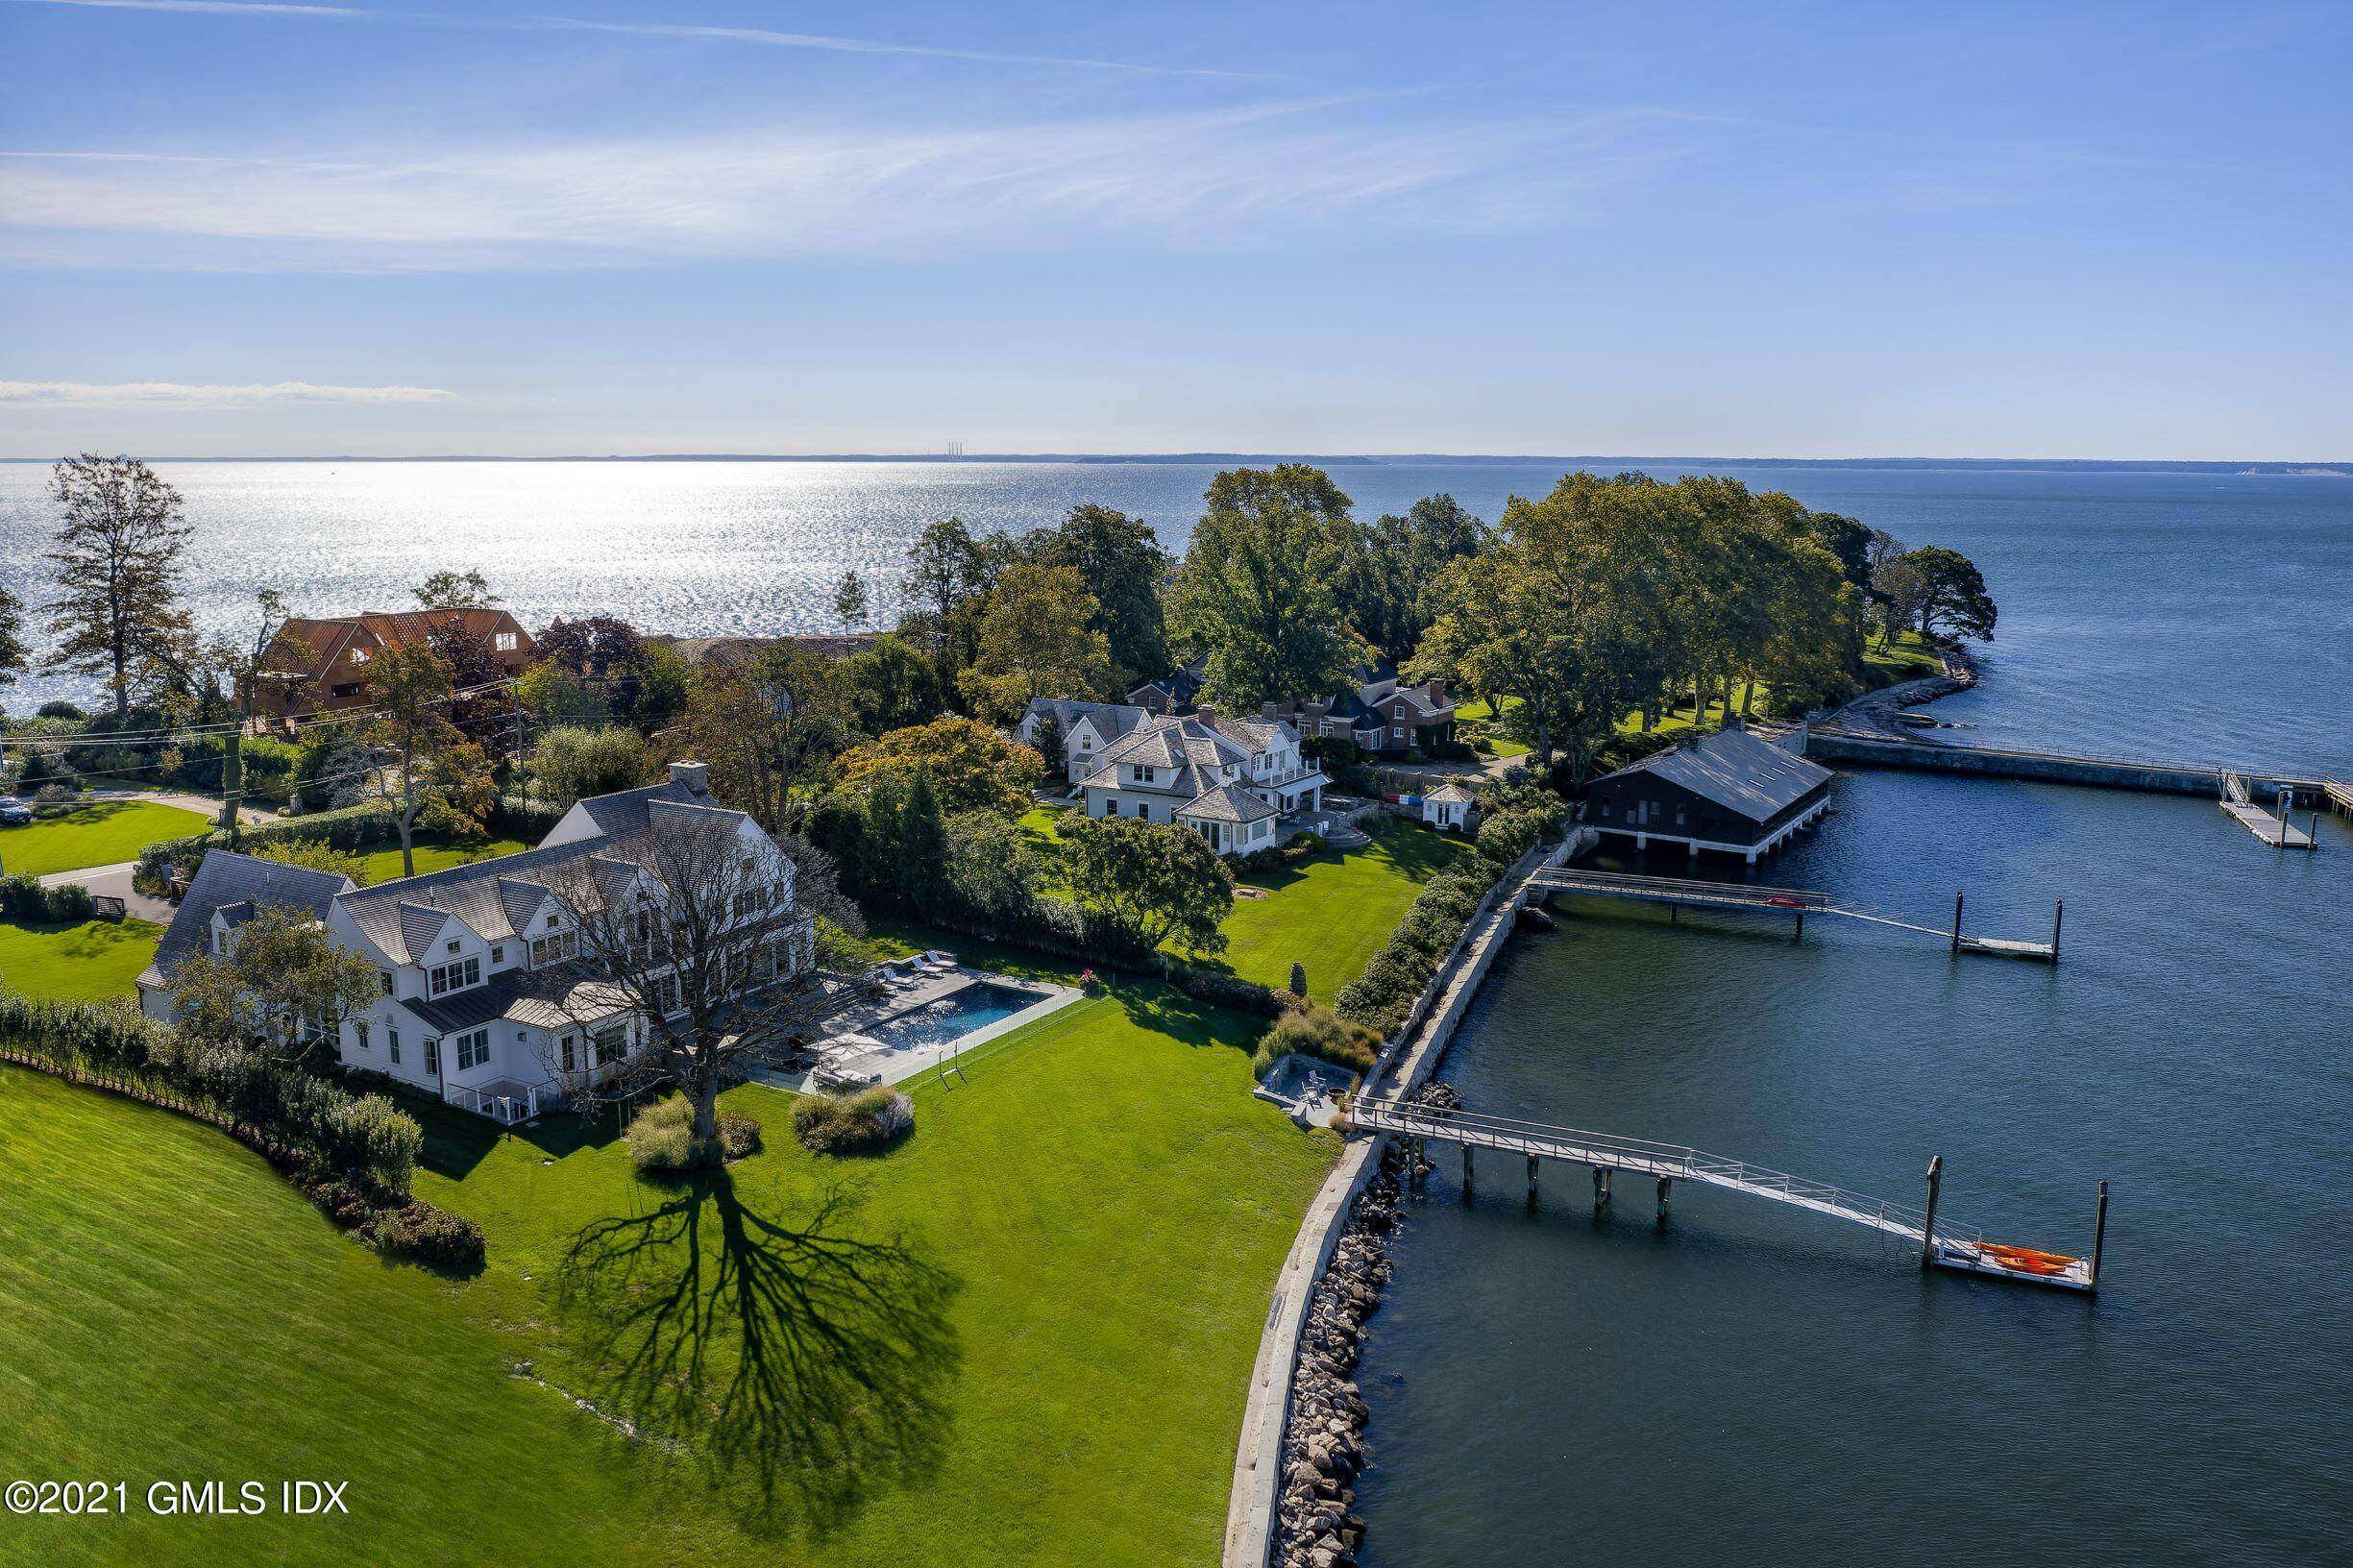 Exceptionally stylish newly rebuilt home in one of the most picturesque waterfront settings imaginable.